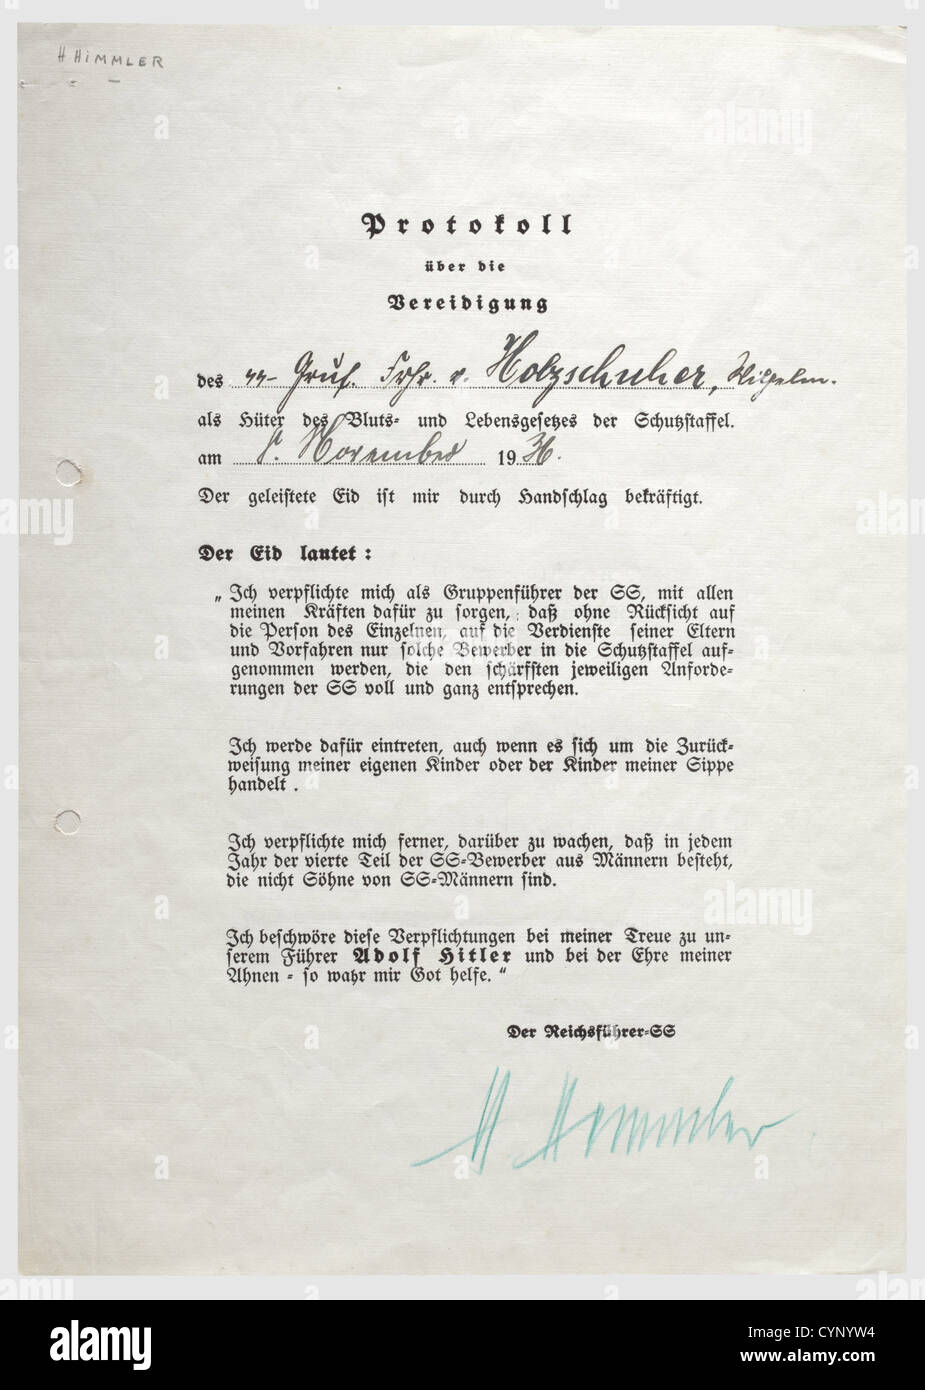 Heinrich Himmler - 'Protocol on the swearing-in ceremony of SS Gruppenführer Freiherr von Holzschuher,as Keeper of the Blood and Life Law of the Schutzstaffel'. Preprinted form with the oath,rank,name,and date '8. November 1936' written in ink. The lower edge with the handwritten ink signature 'H. Himmler' in green indelible pencil. Punched(glued from the back). Rare document. Wilhelm Freiherr von Holzschuher was appointed SS Gruppenführer in 1934 and Chief of the Settling Office in the RuSHA in 1939,historic,historical,1930s,20th century,autograph,a,Additional-Rights-Clearences-Not Available Stock Photo